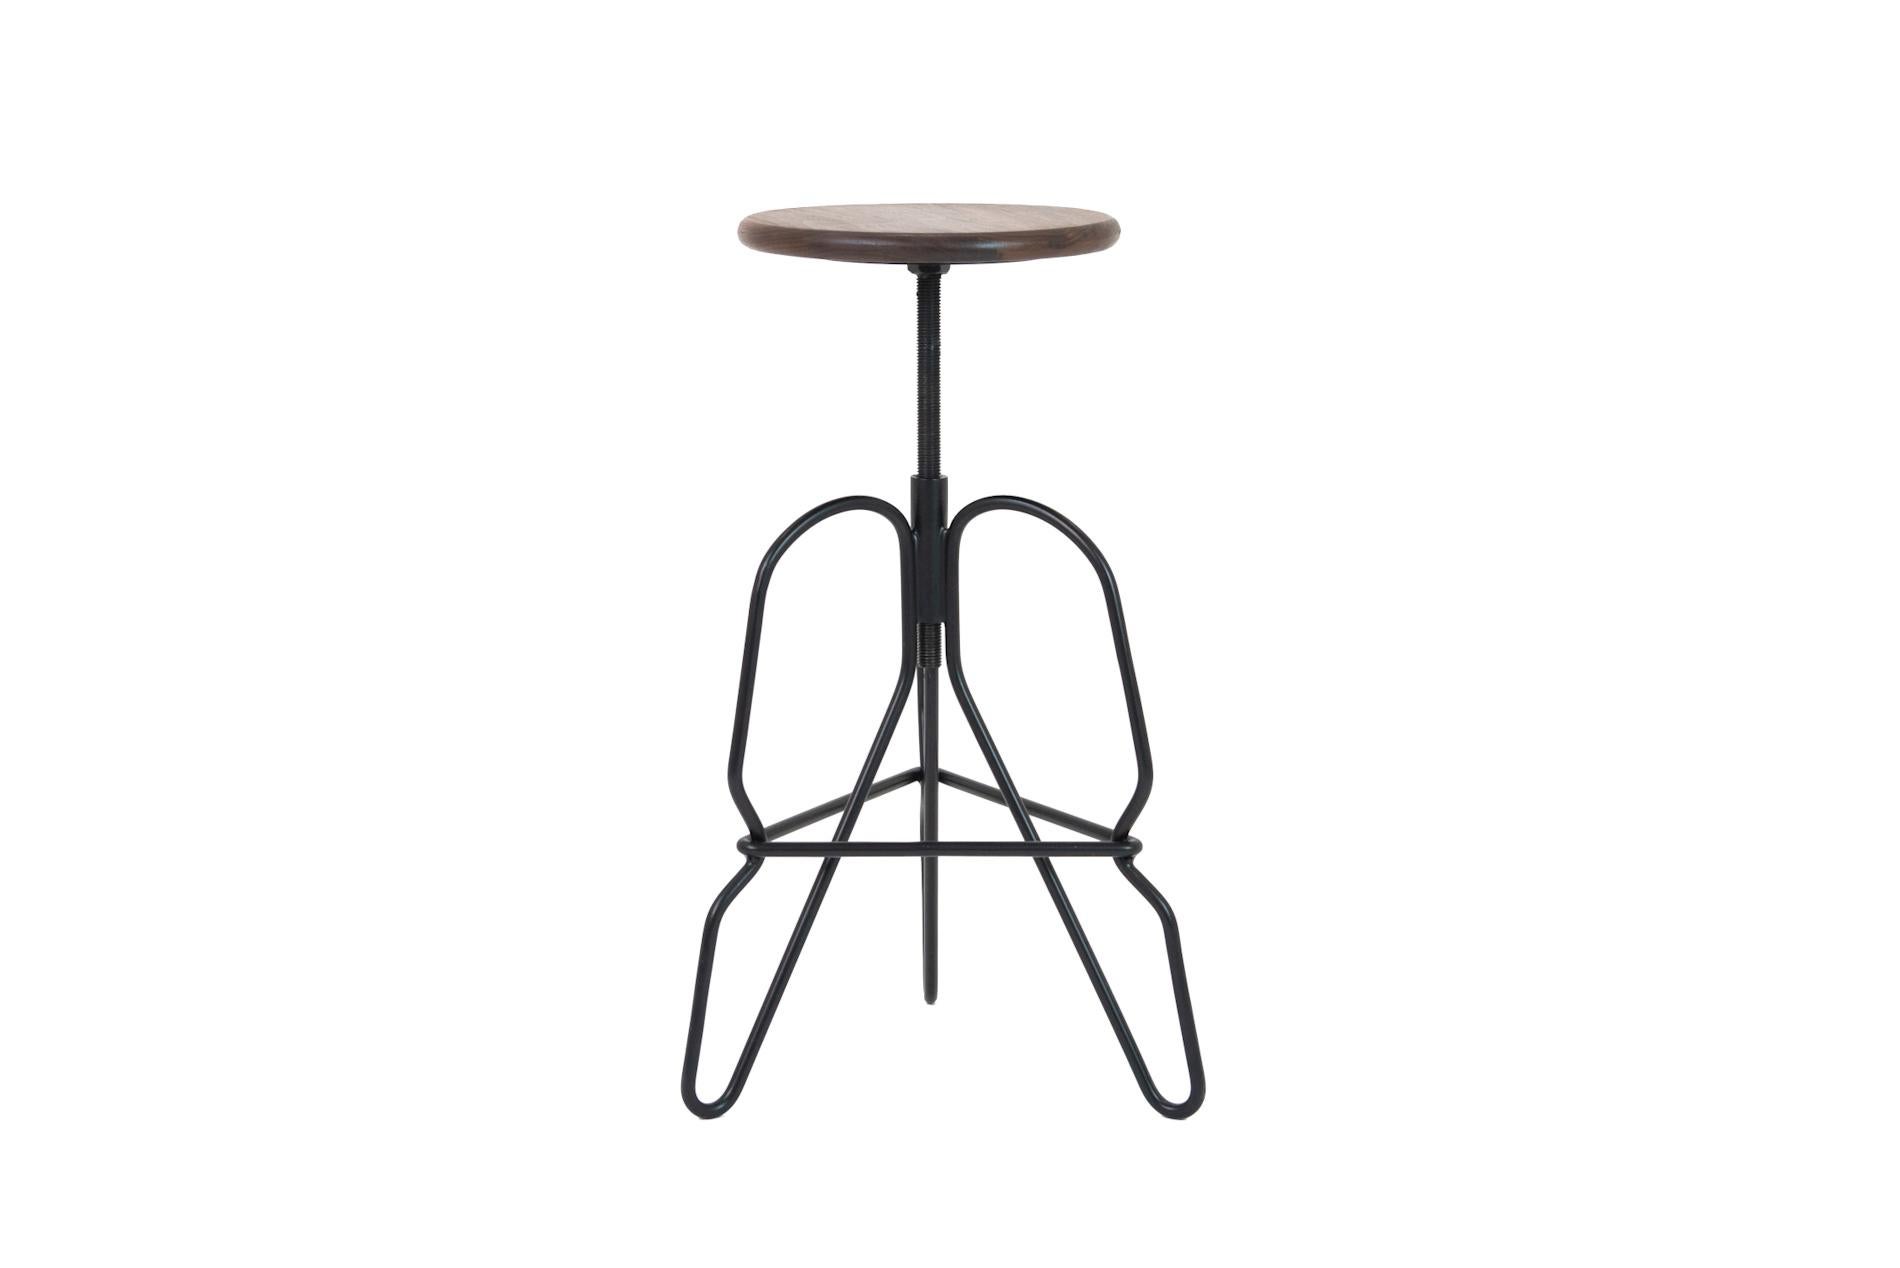 Powder-Coated Adjustable Rig Stool in Solid Black Walnut Wood and Hand Bent Steel